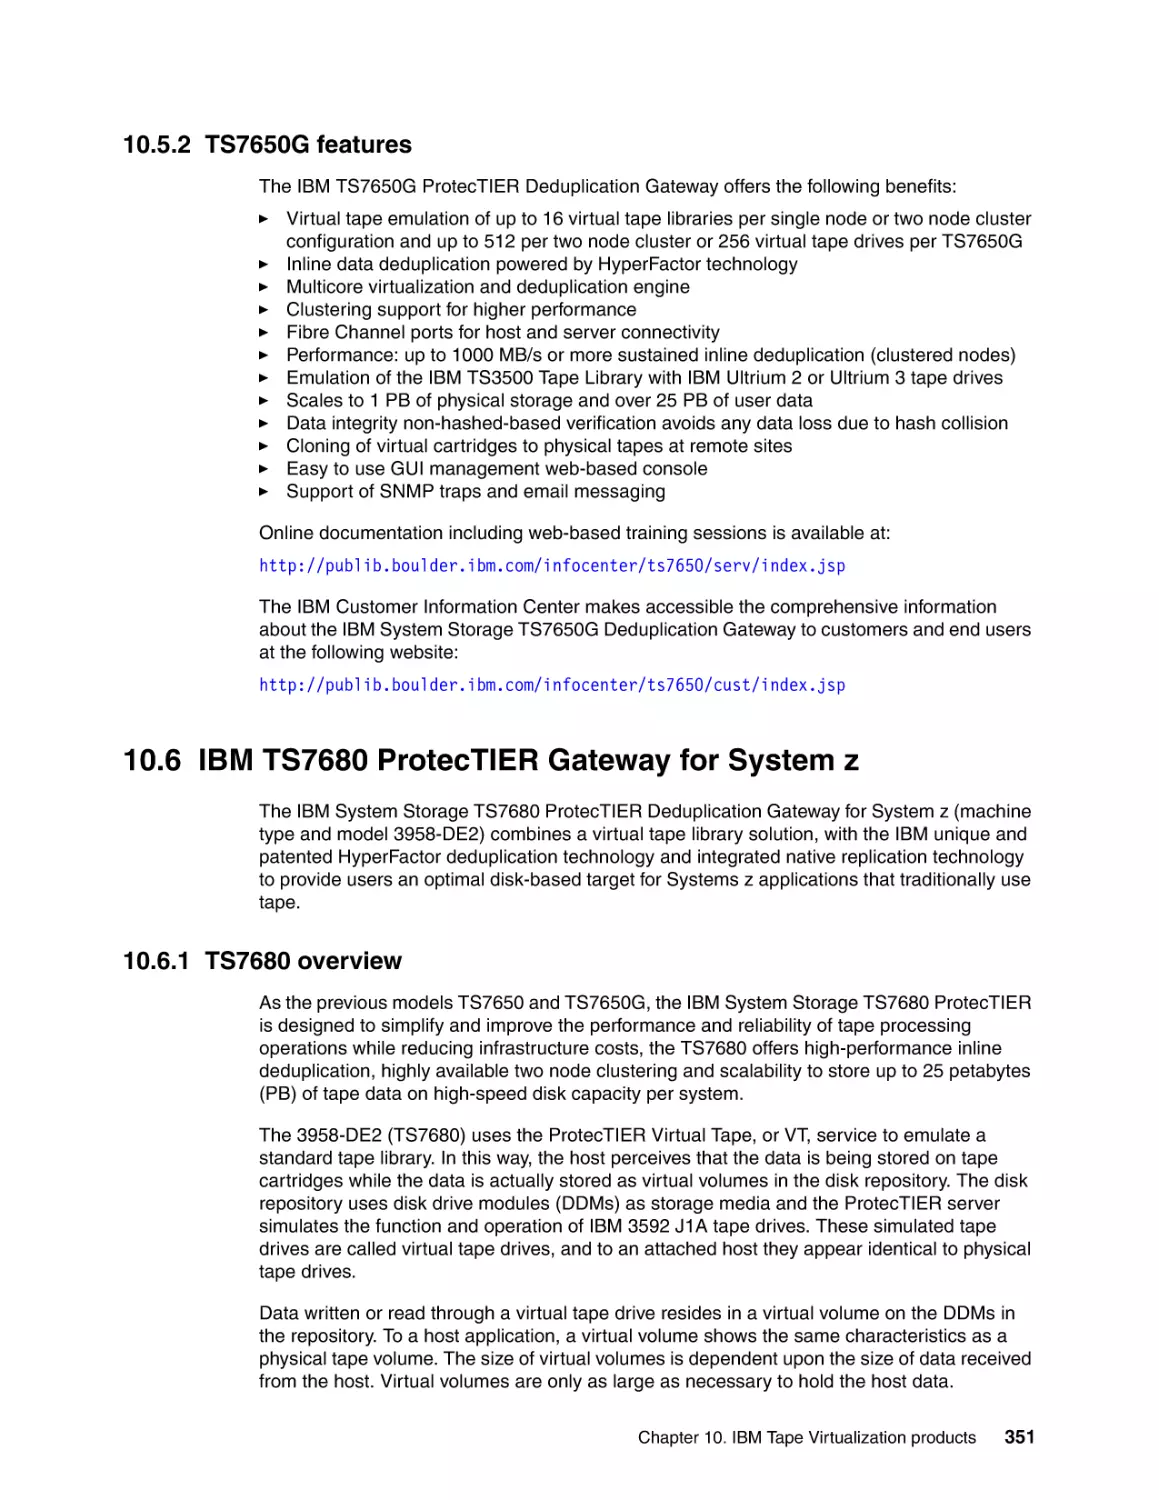 10.5.2 TS7650G features
10.6 IBM TS7680 ProtecTIER Gateway for System z
10.6.1 TS7680 overview